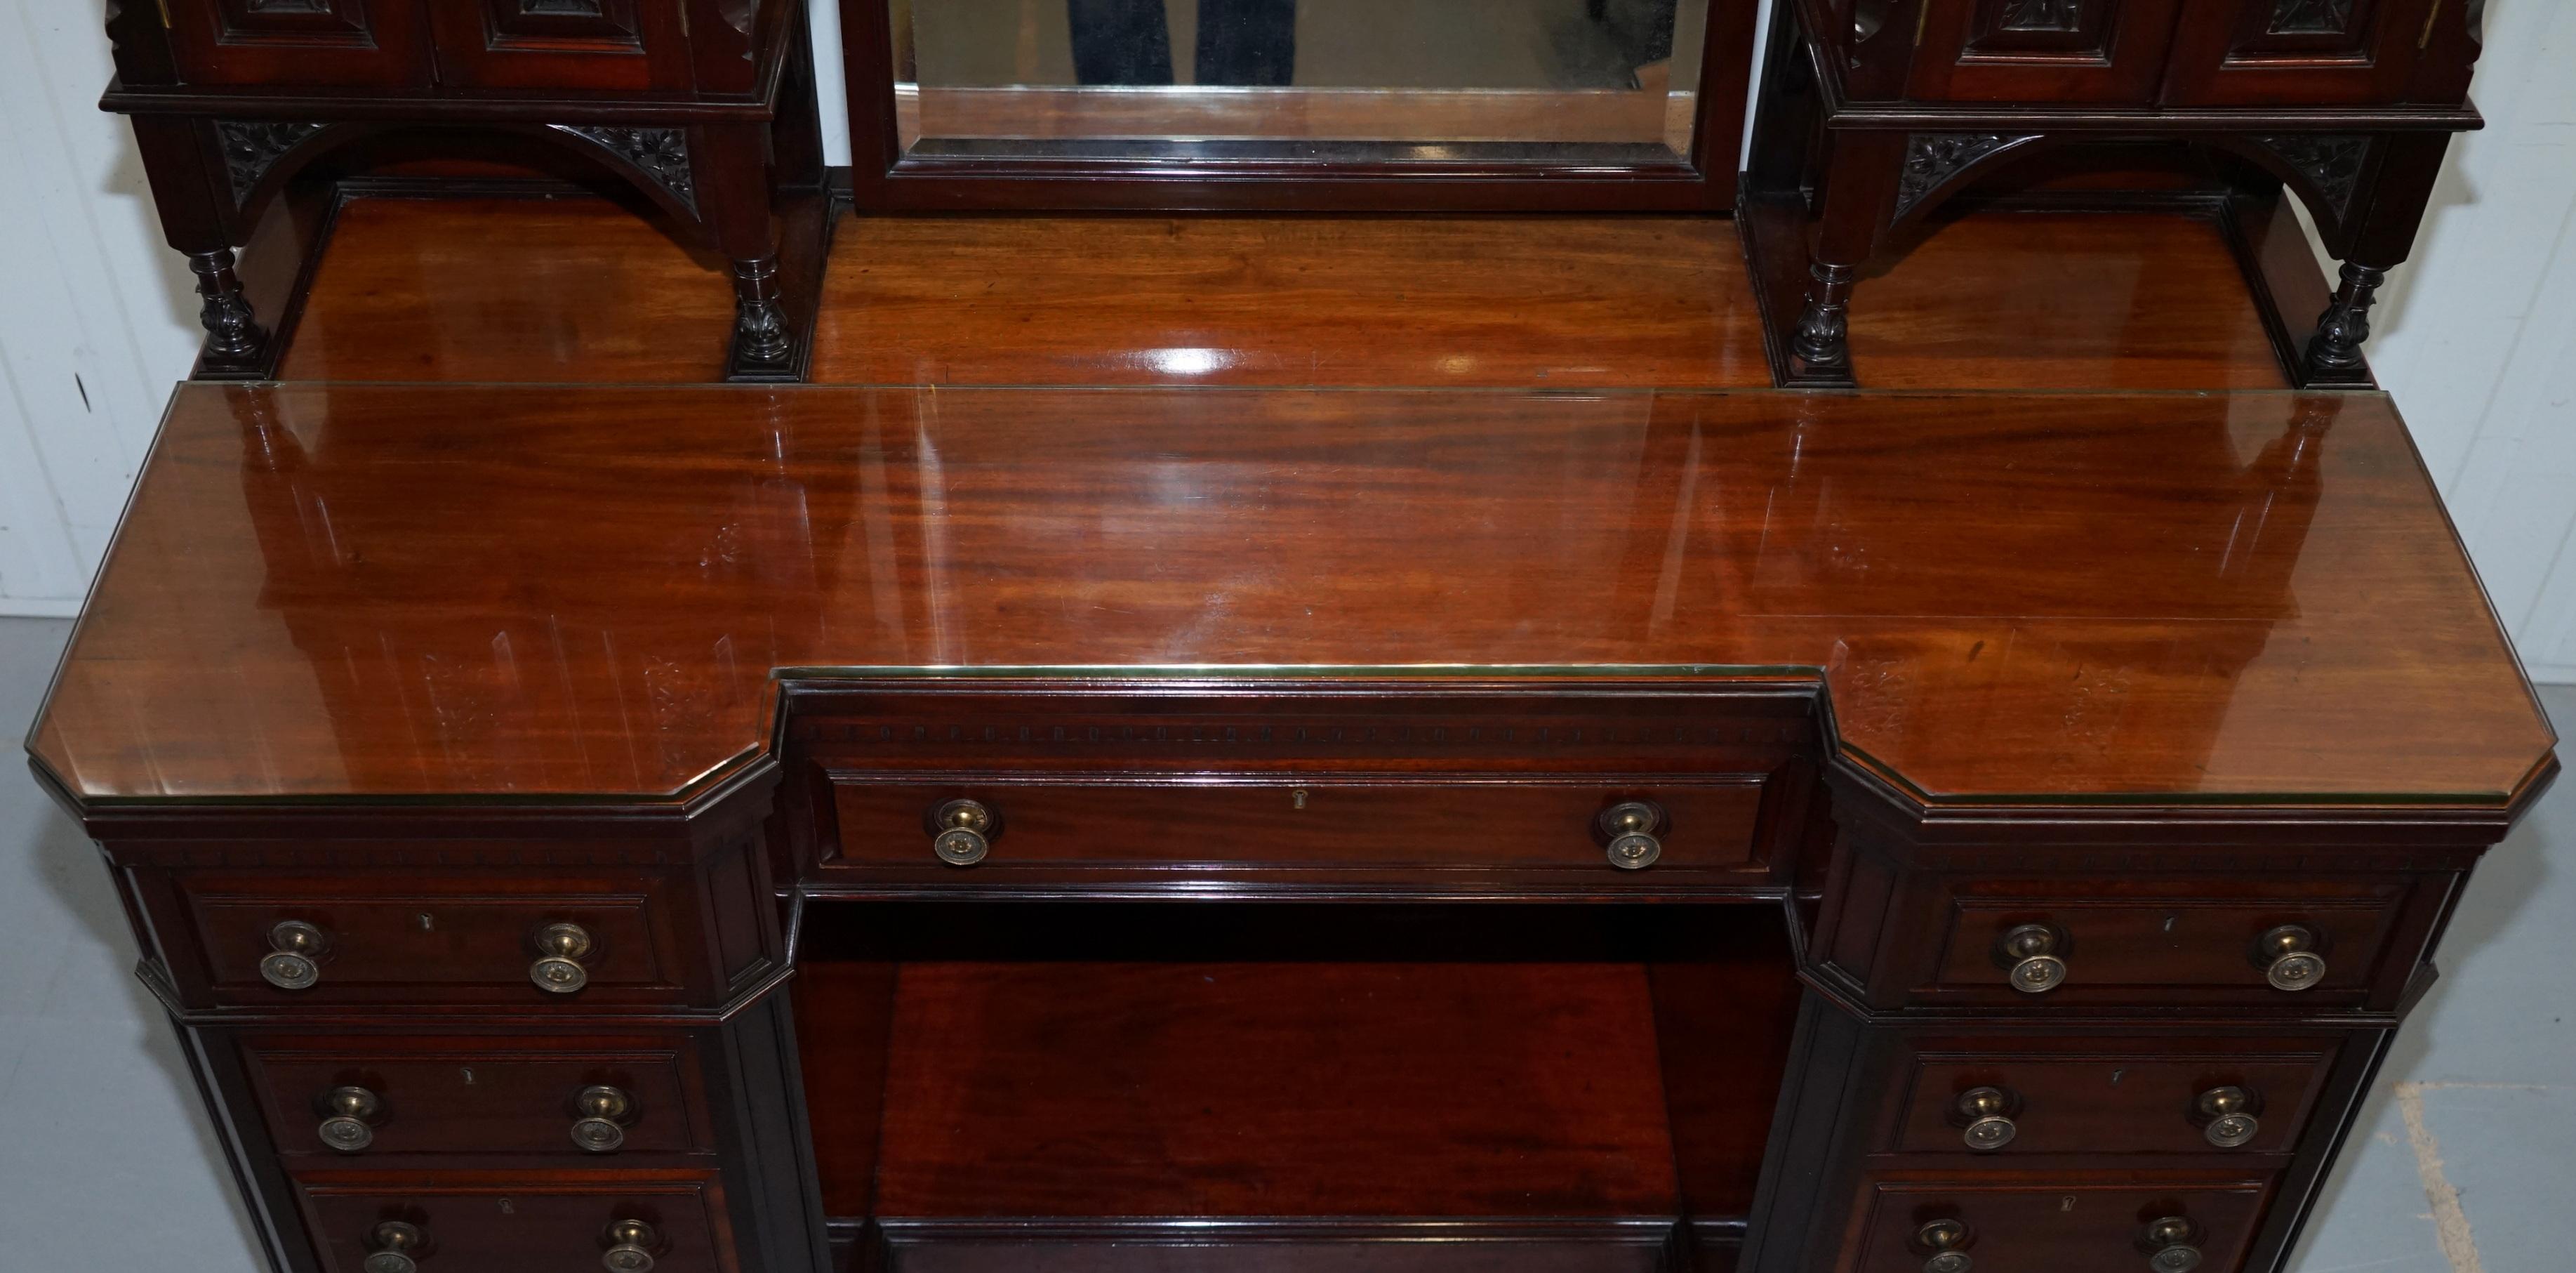 Ornate Grand Victorian Hardwood Dressing Table Loads of Drawers Storage Space 3